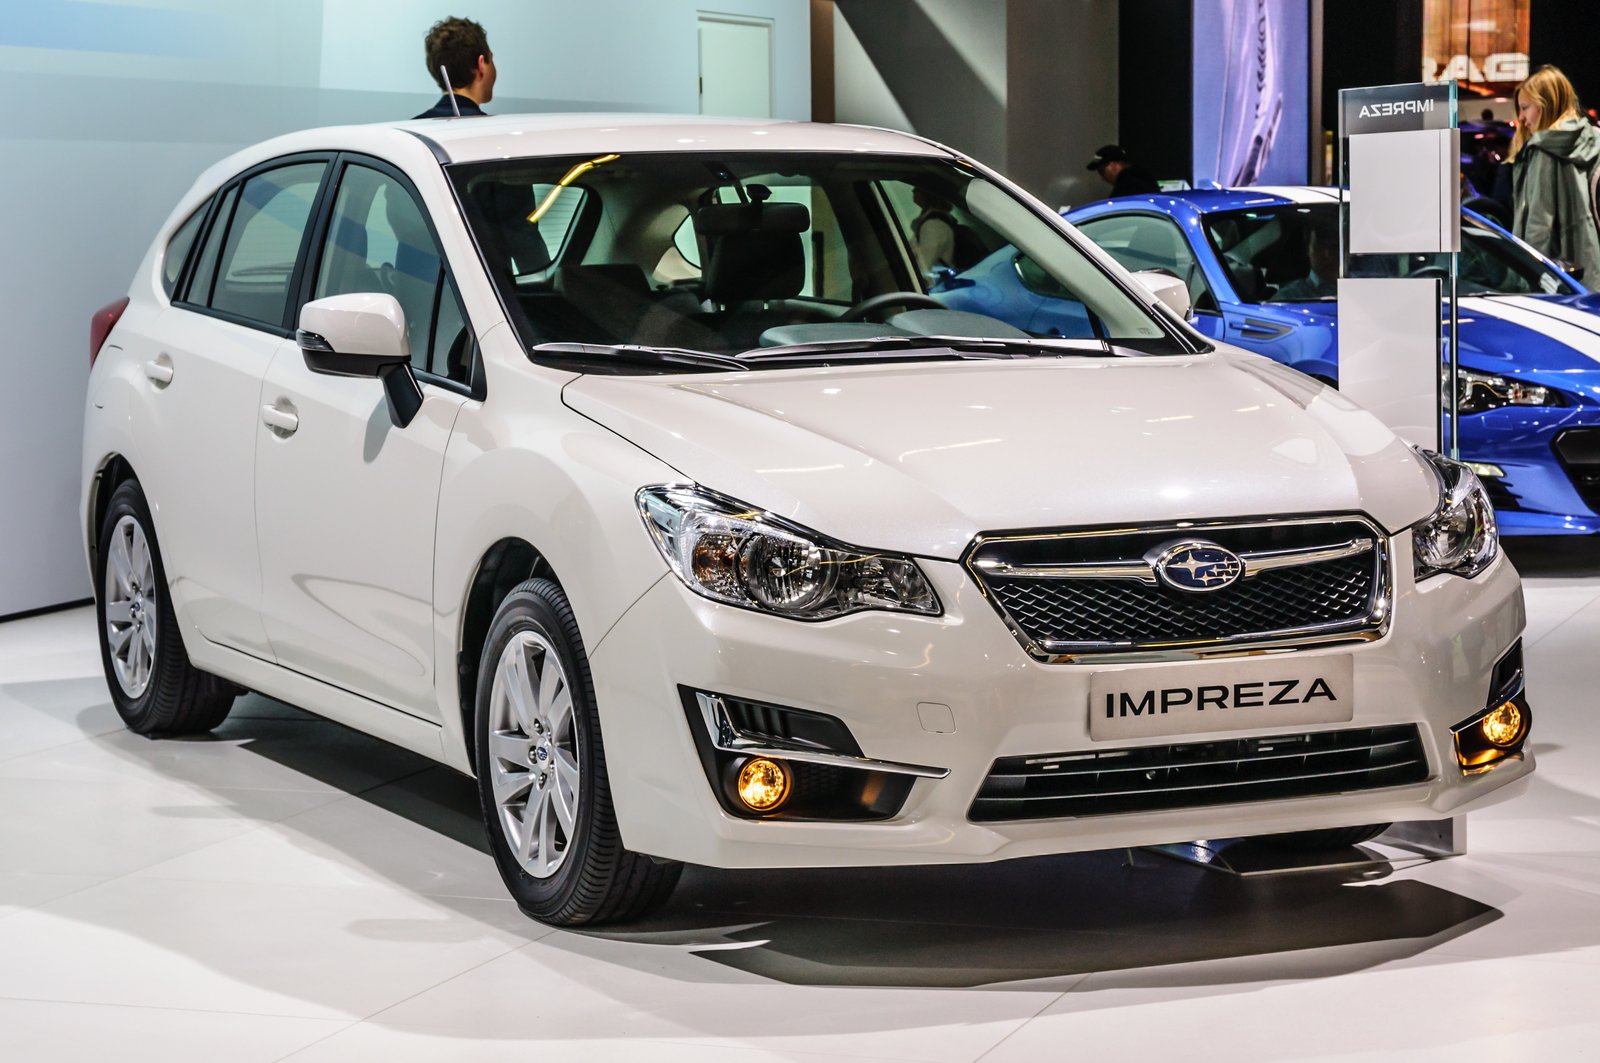 <p>The <strong>Subaru Impreza</strong> from 1998 to 2011 is known for some potential issues. Notably, the 2008 model had problems with windshield/windows obstructions, while the 2012 Impreza faced common issues such as: weak transmission, excessive oil consumption and unreliable head gaskets.</p>